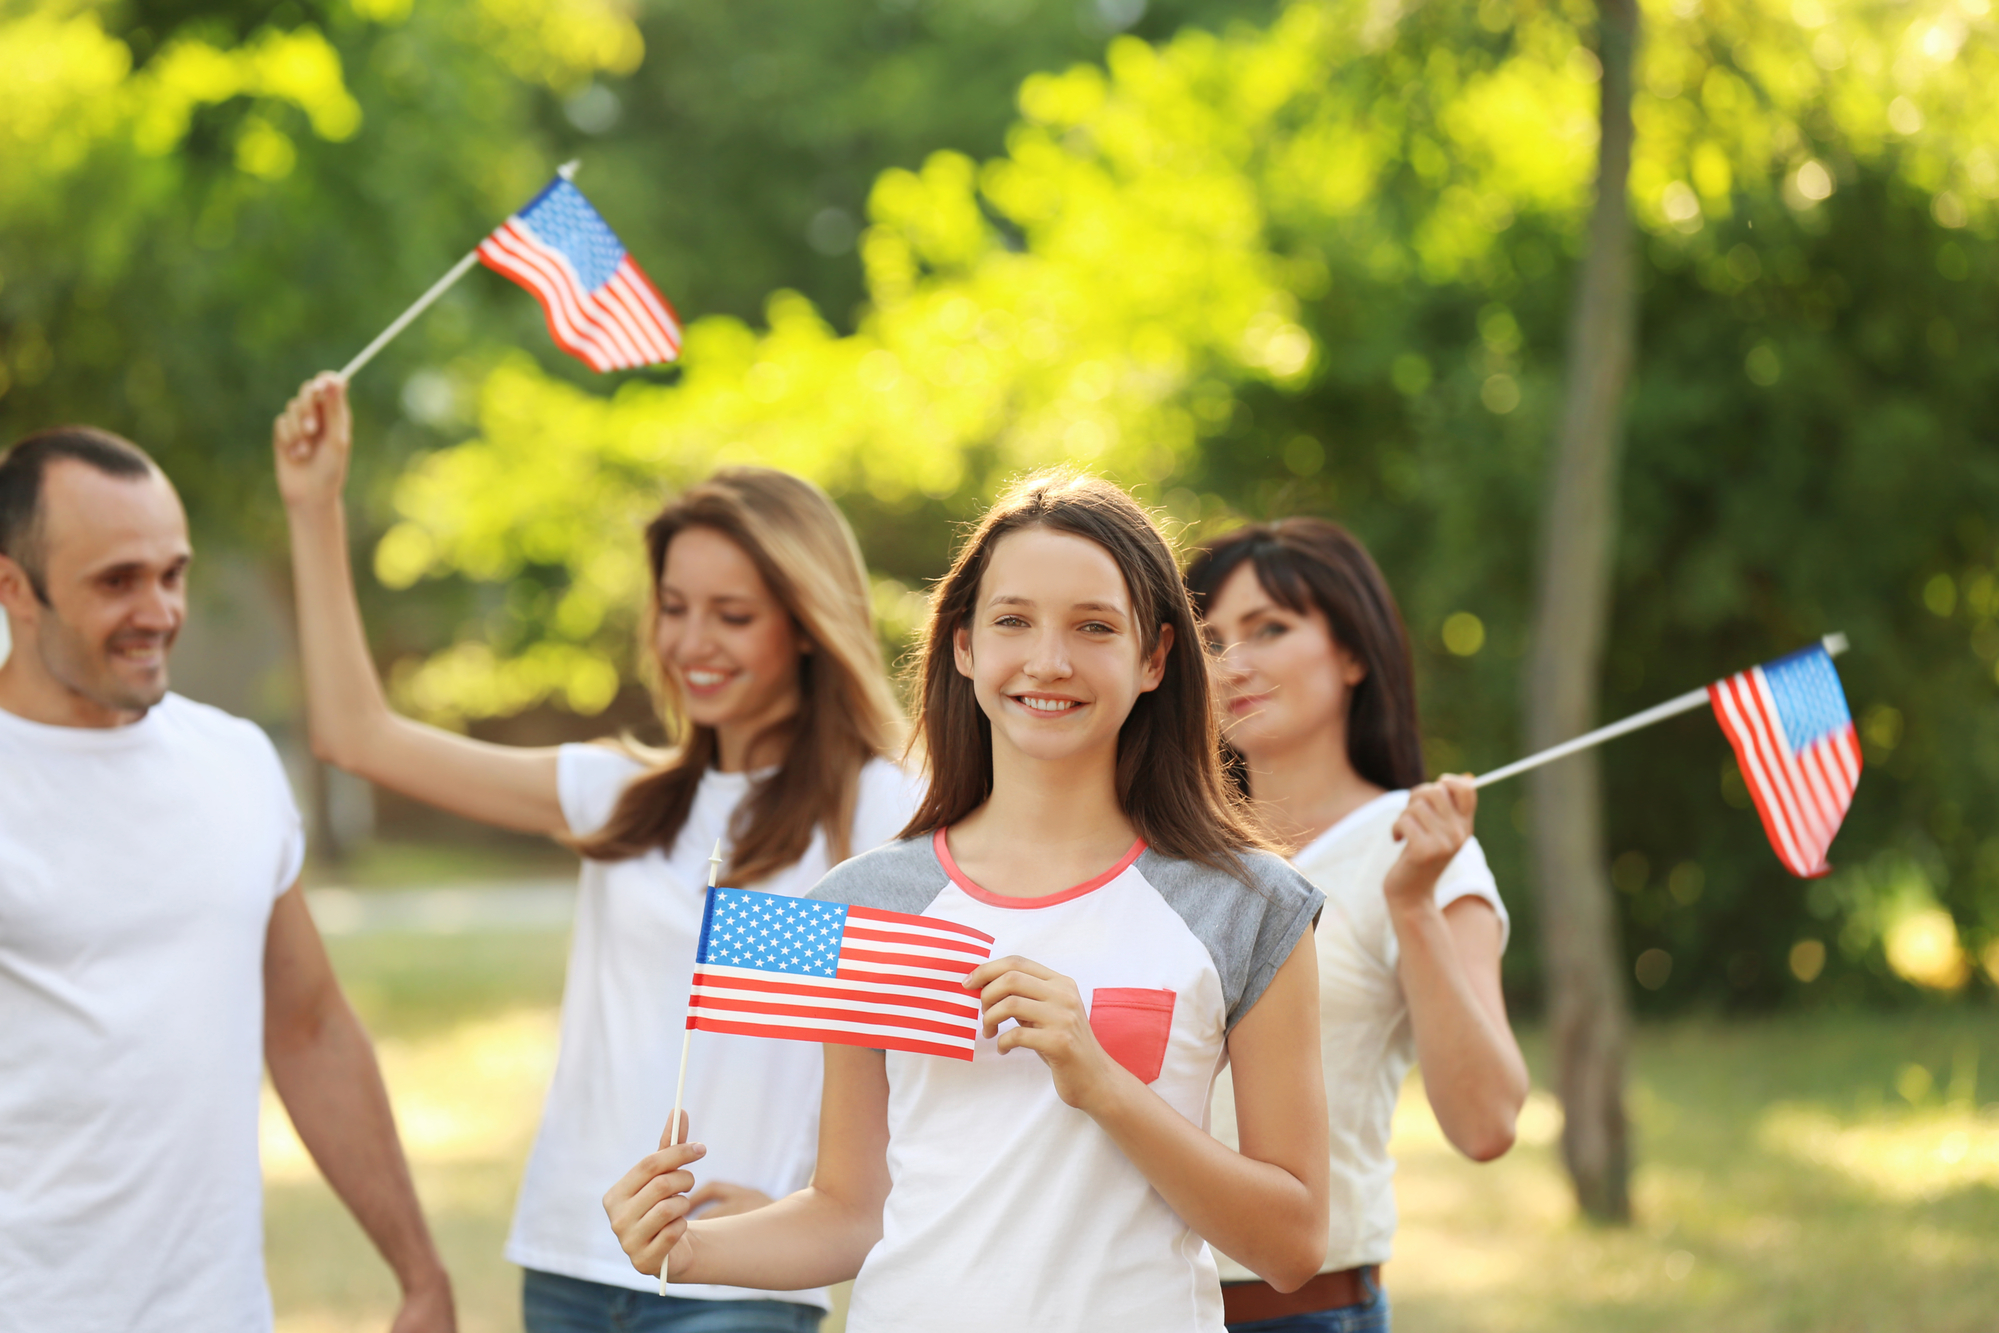 Citizenship and Naturalization: How an Immigration Lawyer Can Guide You Through the Process